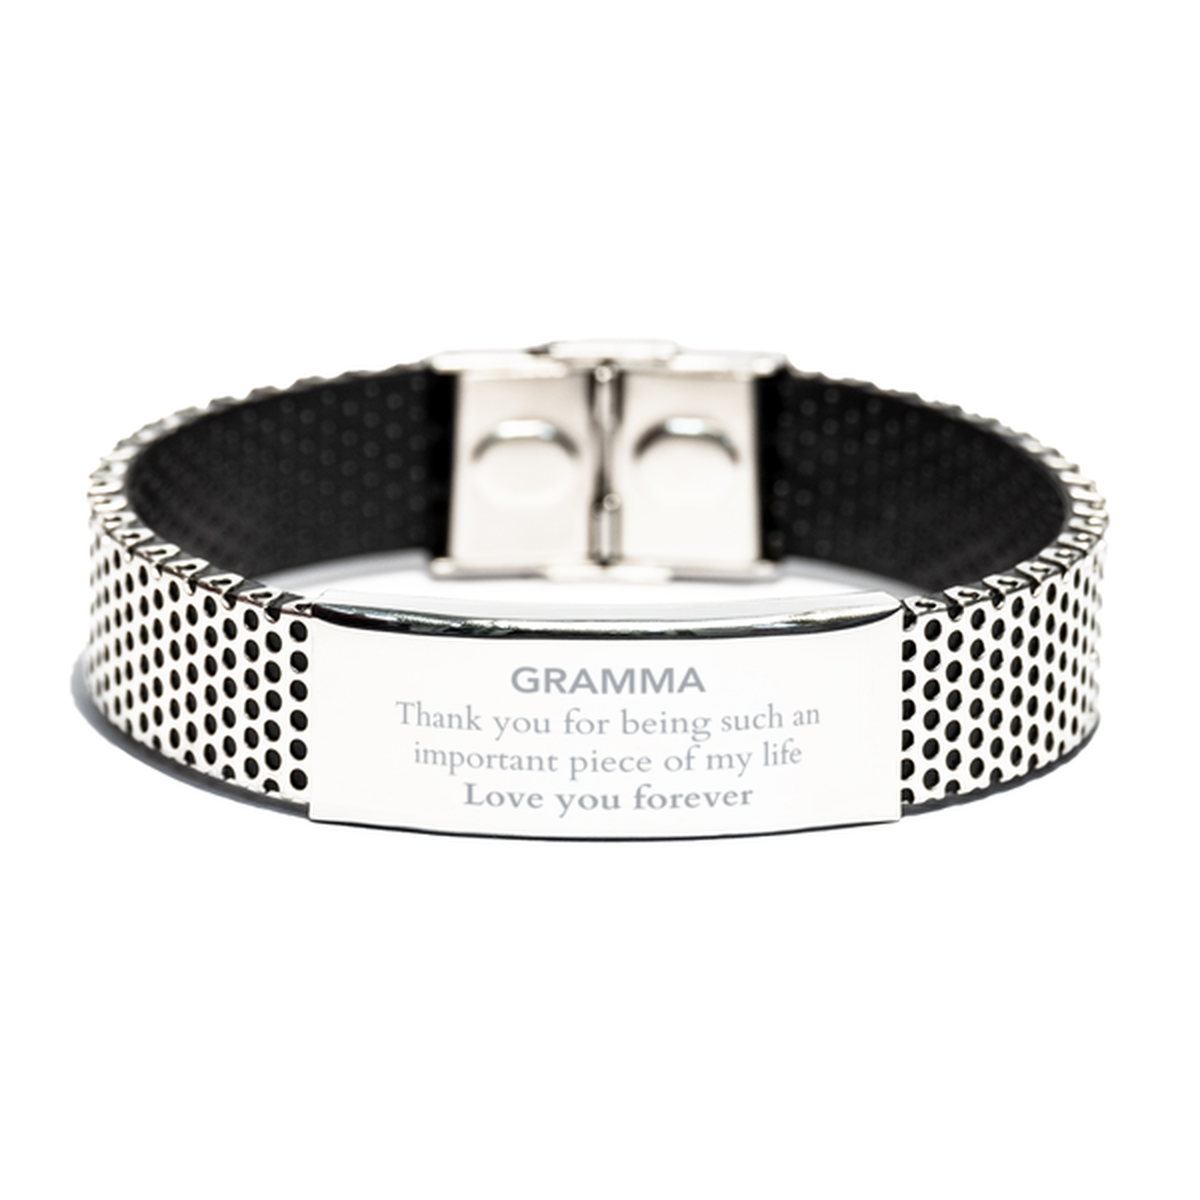 Appropriate Gramma Stainless Steel Bracelet Epic Birthday Gifts for Gramma Thank you for being such an important piece of my life Gramma Christmas Mothers Fathers Day